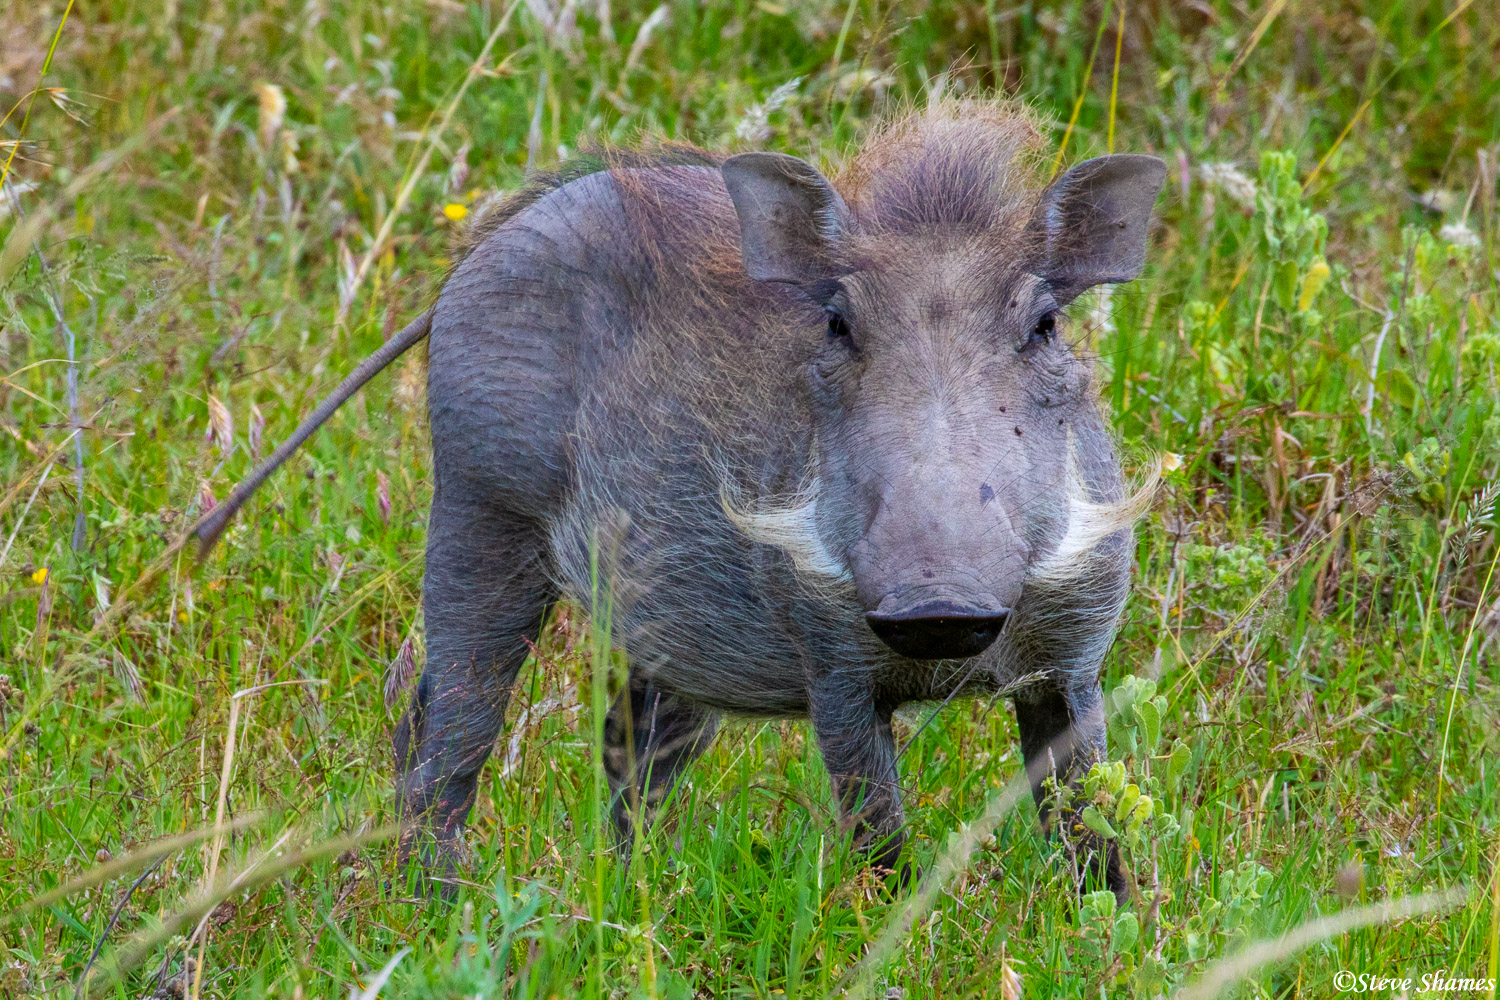 Here is a white whiskered warthog. Warthogs are very shy and hard to get close to.